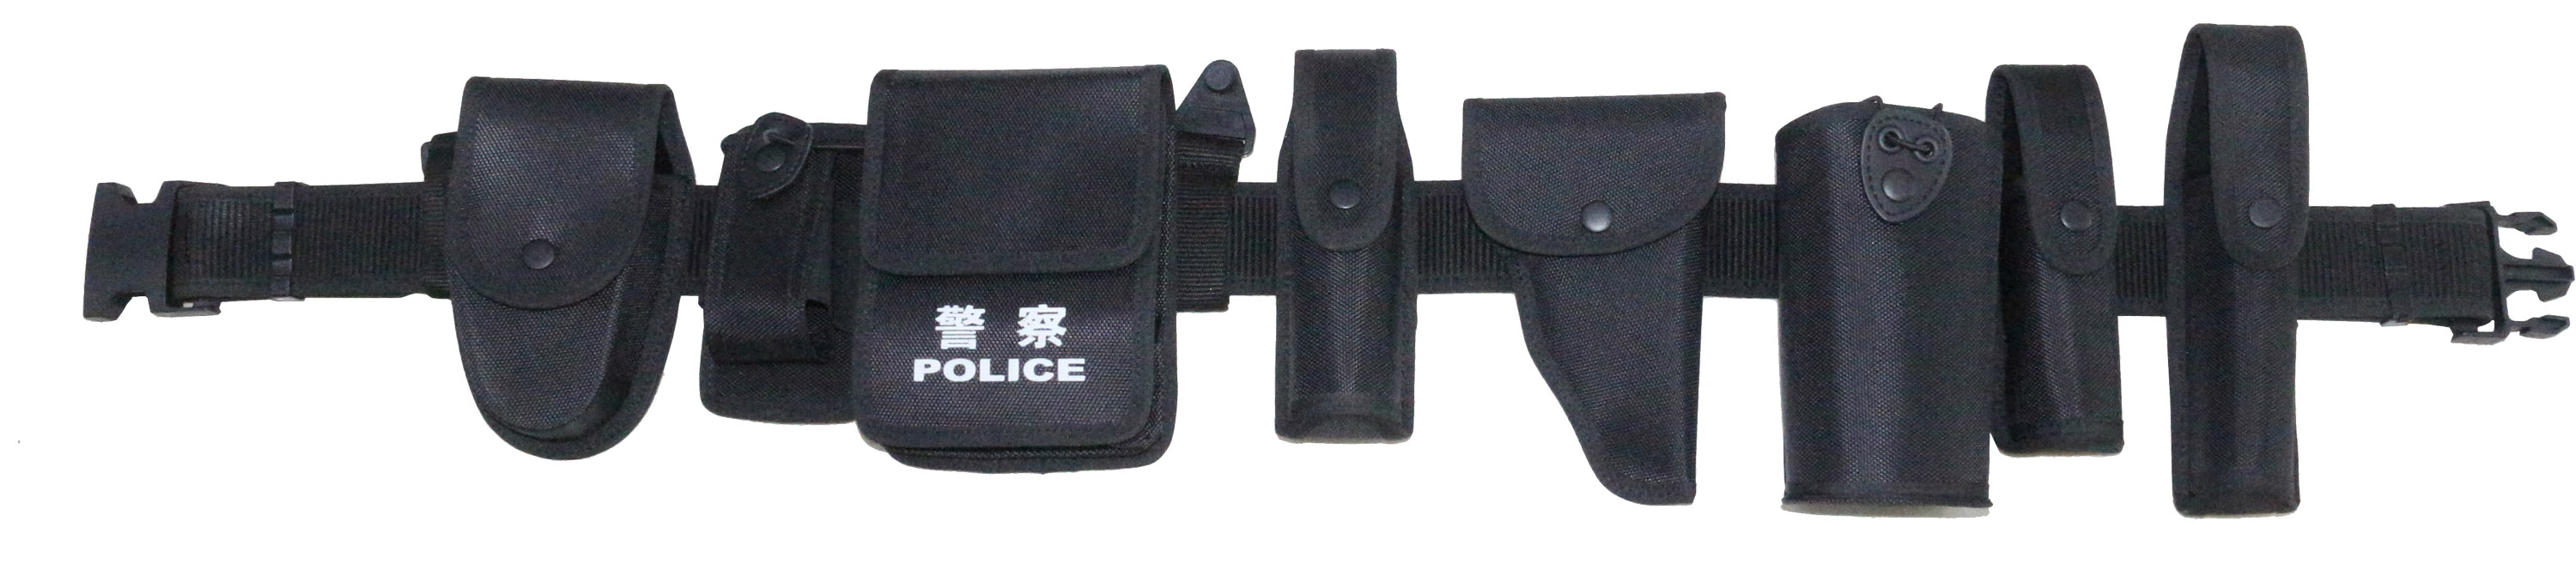 High Quality Police Single Handcuff Pouch